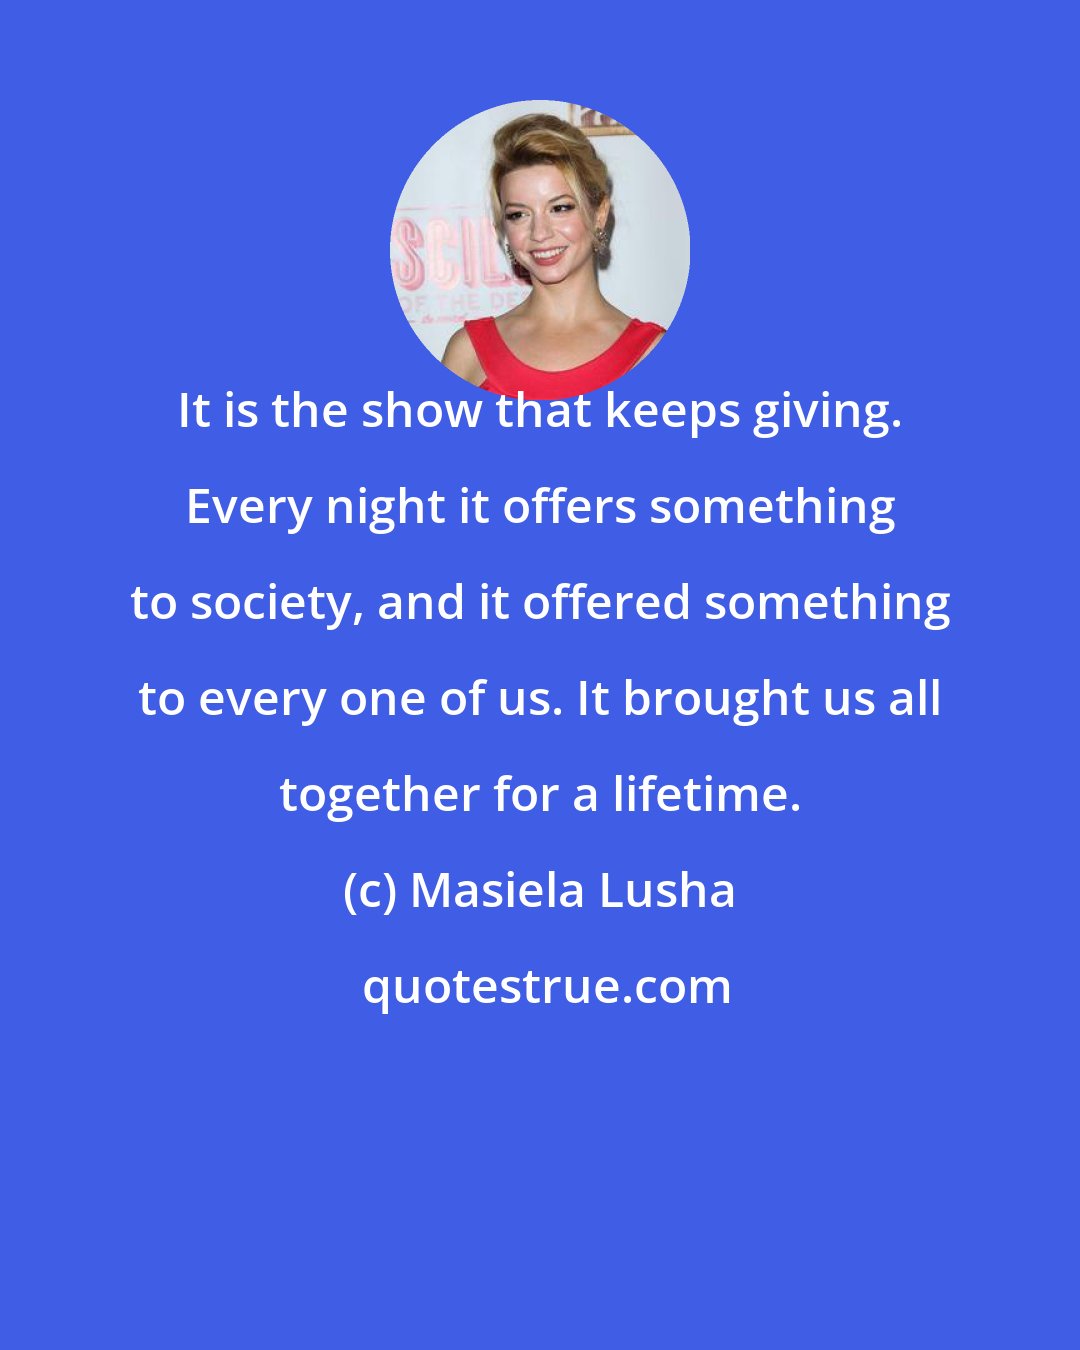 Masiela Lusha: It is the show that keeps giving. Every night it offers something to society, and it offered something to every one of us. It brought us all together for a lifetime.